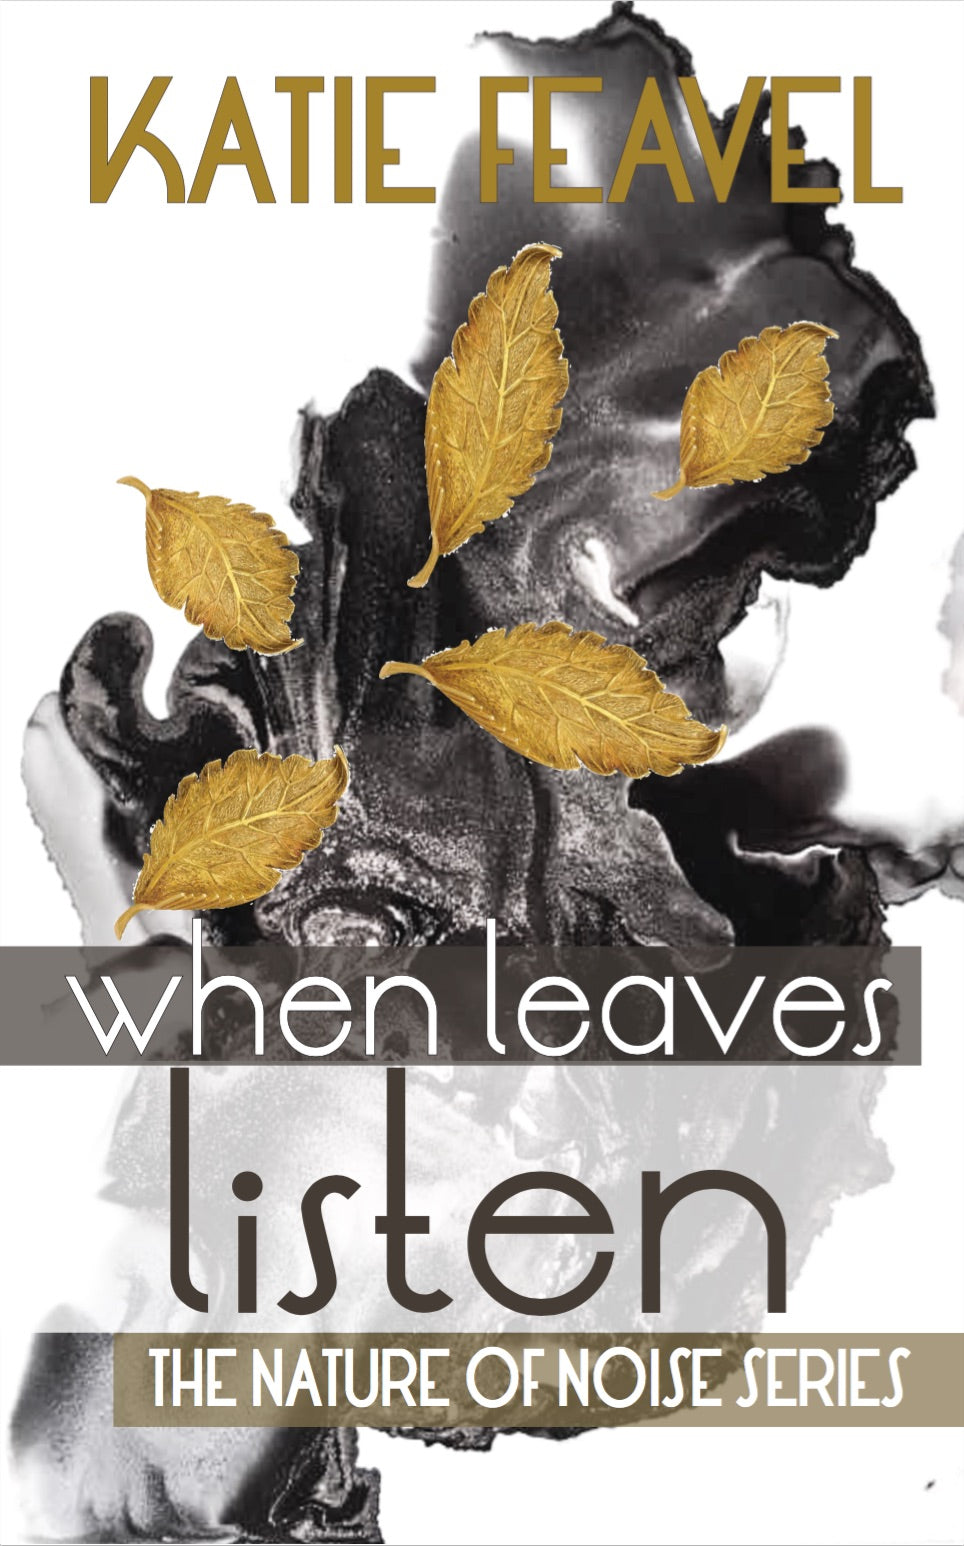 OUT OF PRINT - When Leaves Listen Paperback - Signed